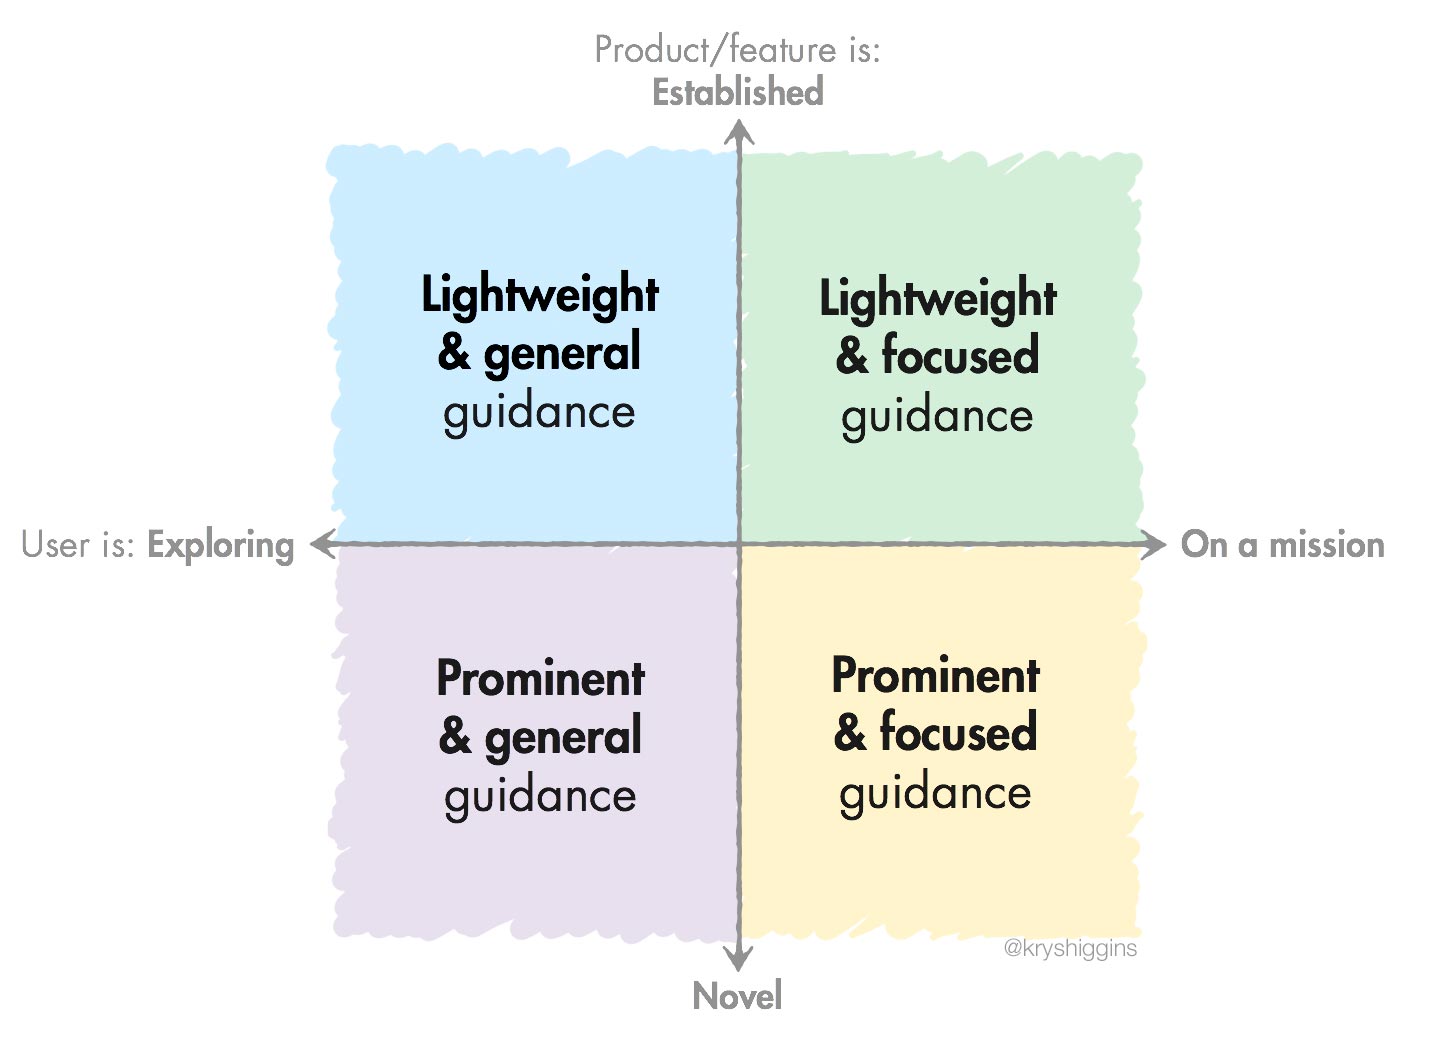 Guidelines for how to provide guidance in onboarding scenarios